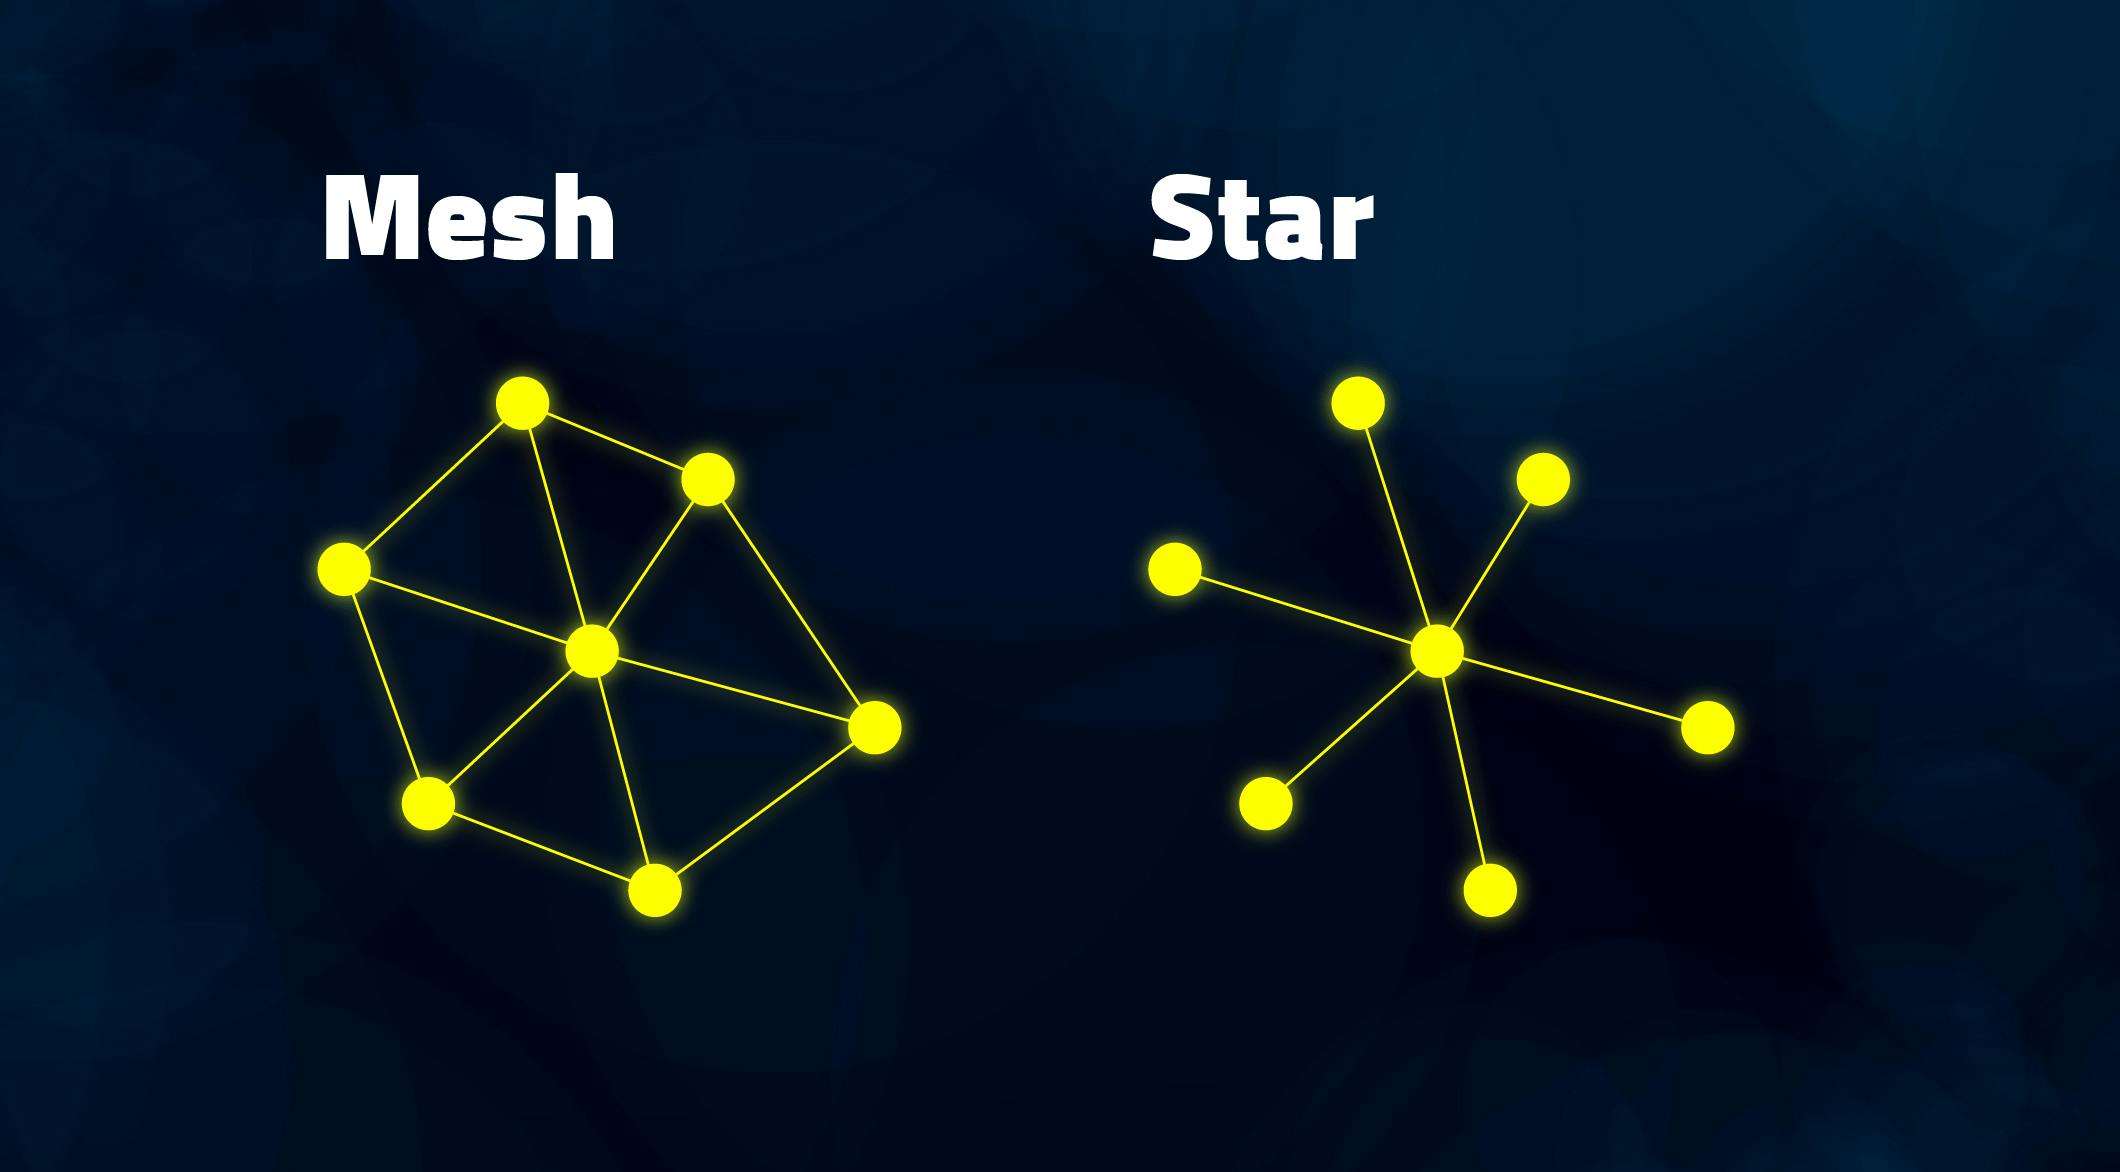 A scheme explaining the Mesh system and the STAR system